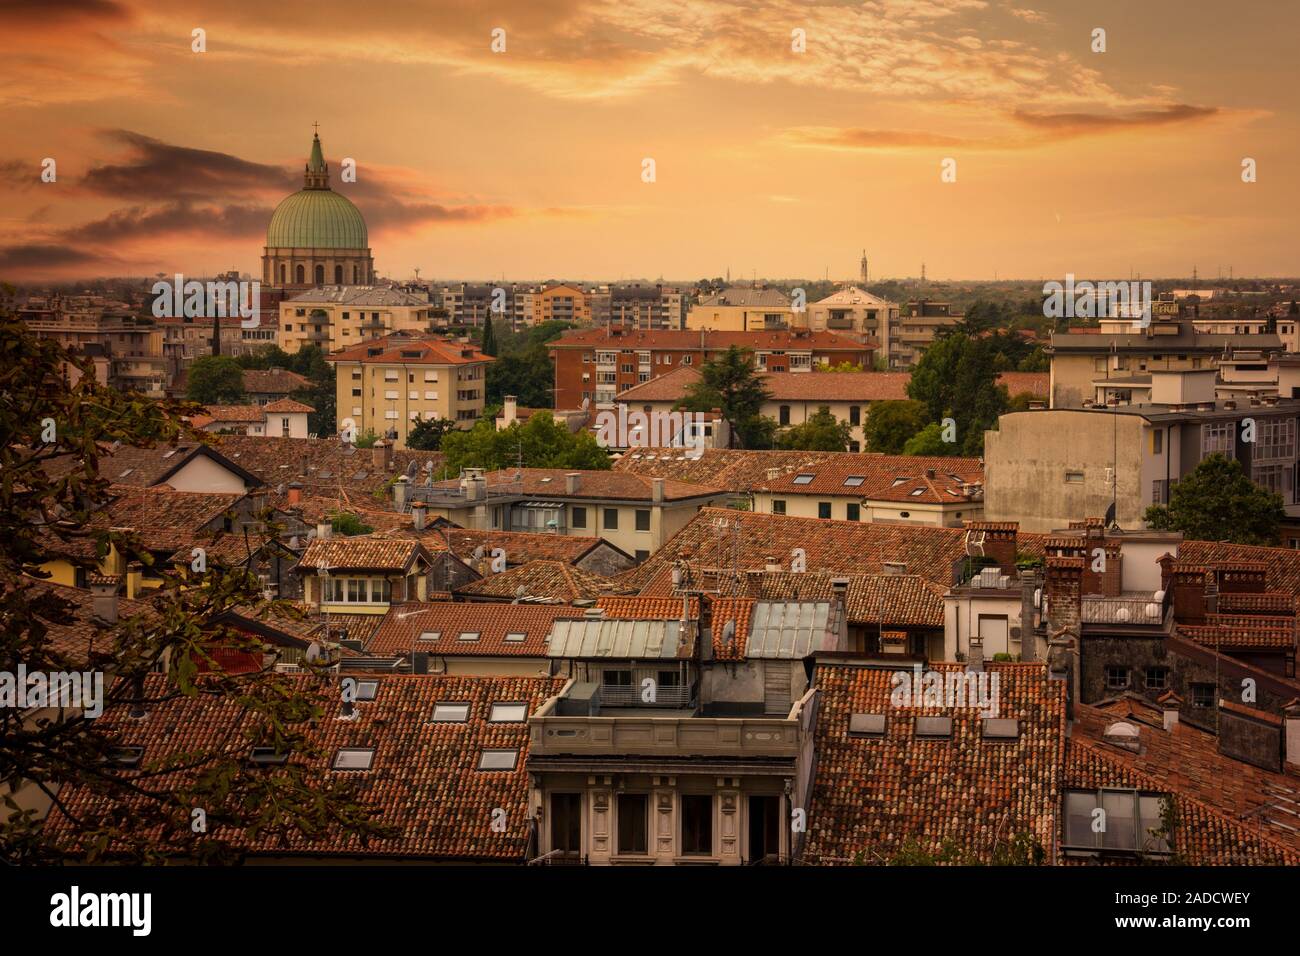 View of Udine in Italy. Summer evening with nice sunset. Stock Photo